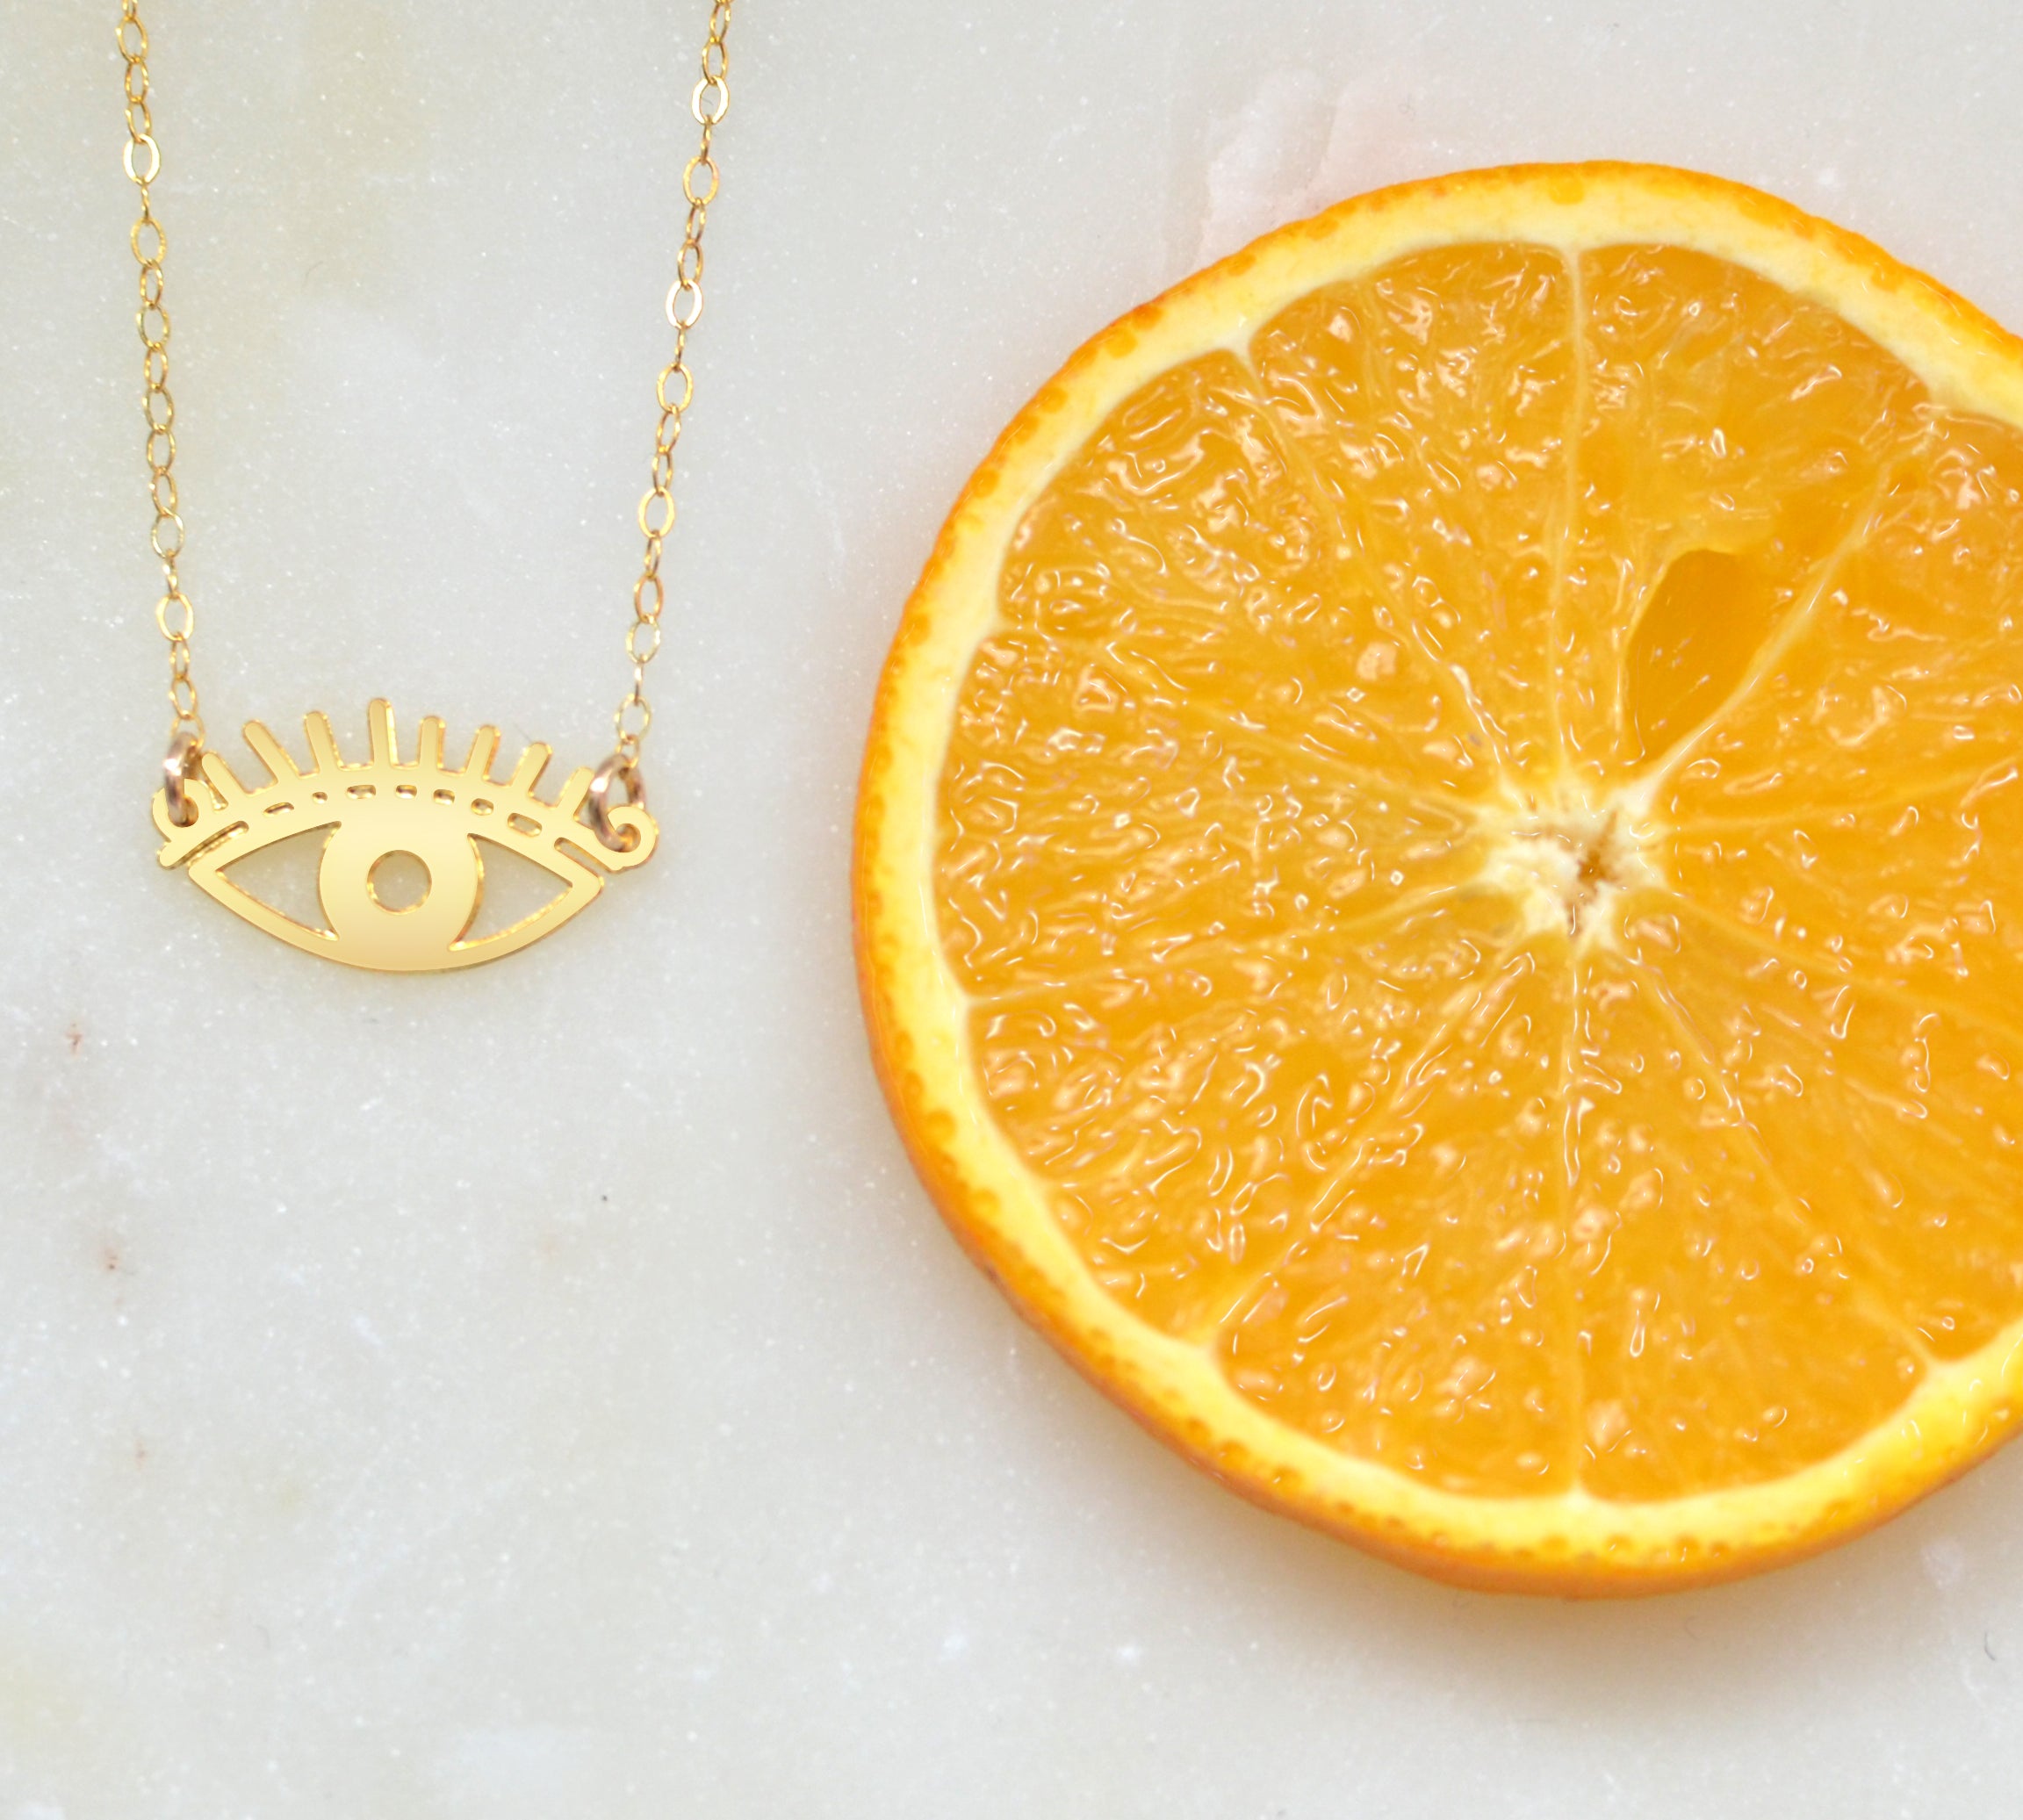 Mini Eye Necklace - High Quality, Affordable Necklace - Available in Gold and Silver - Made in USA - Brevity Jewelry